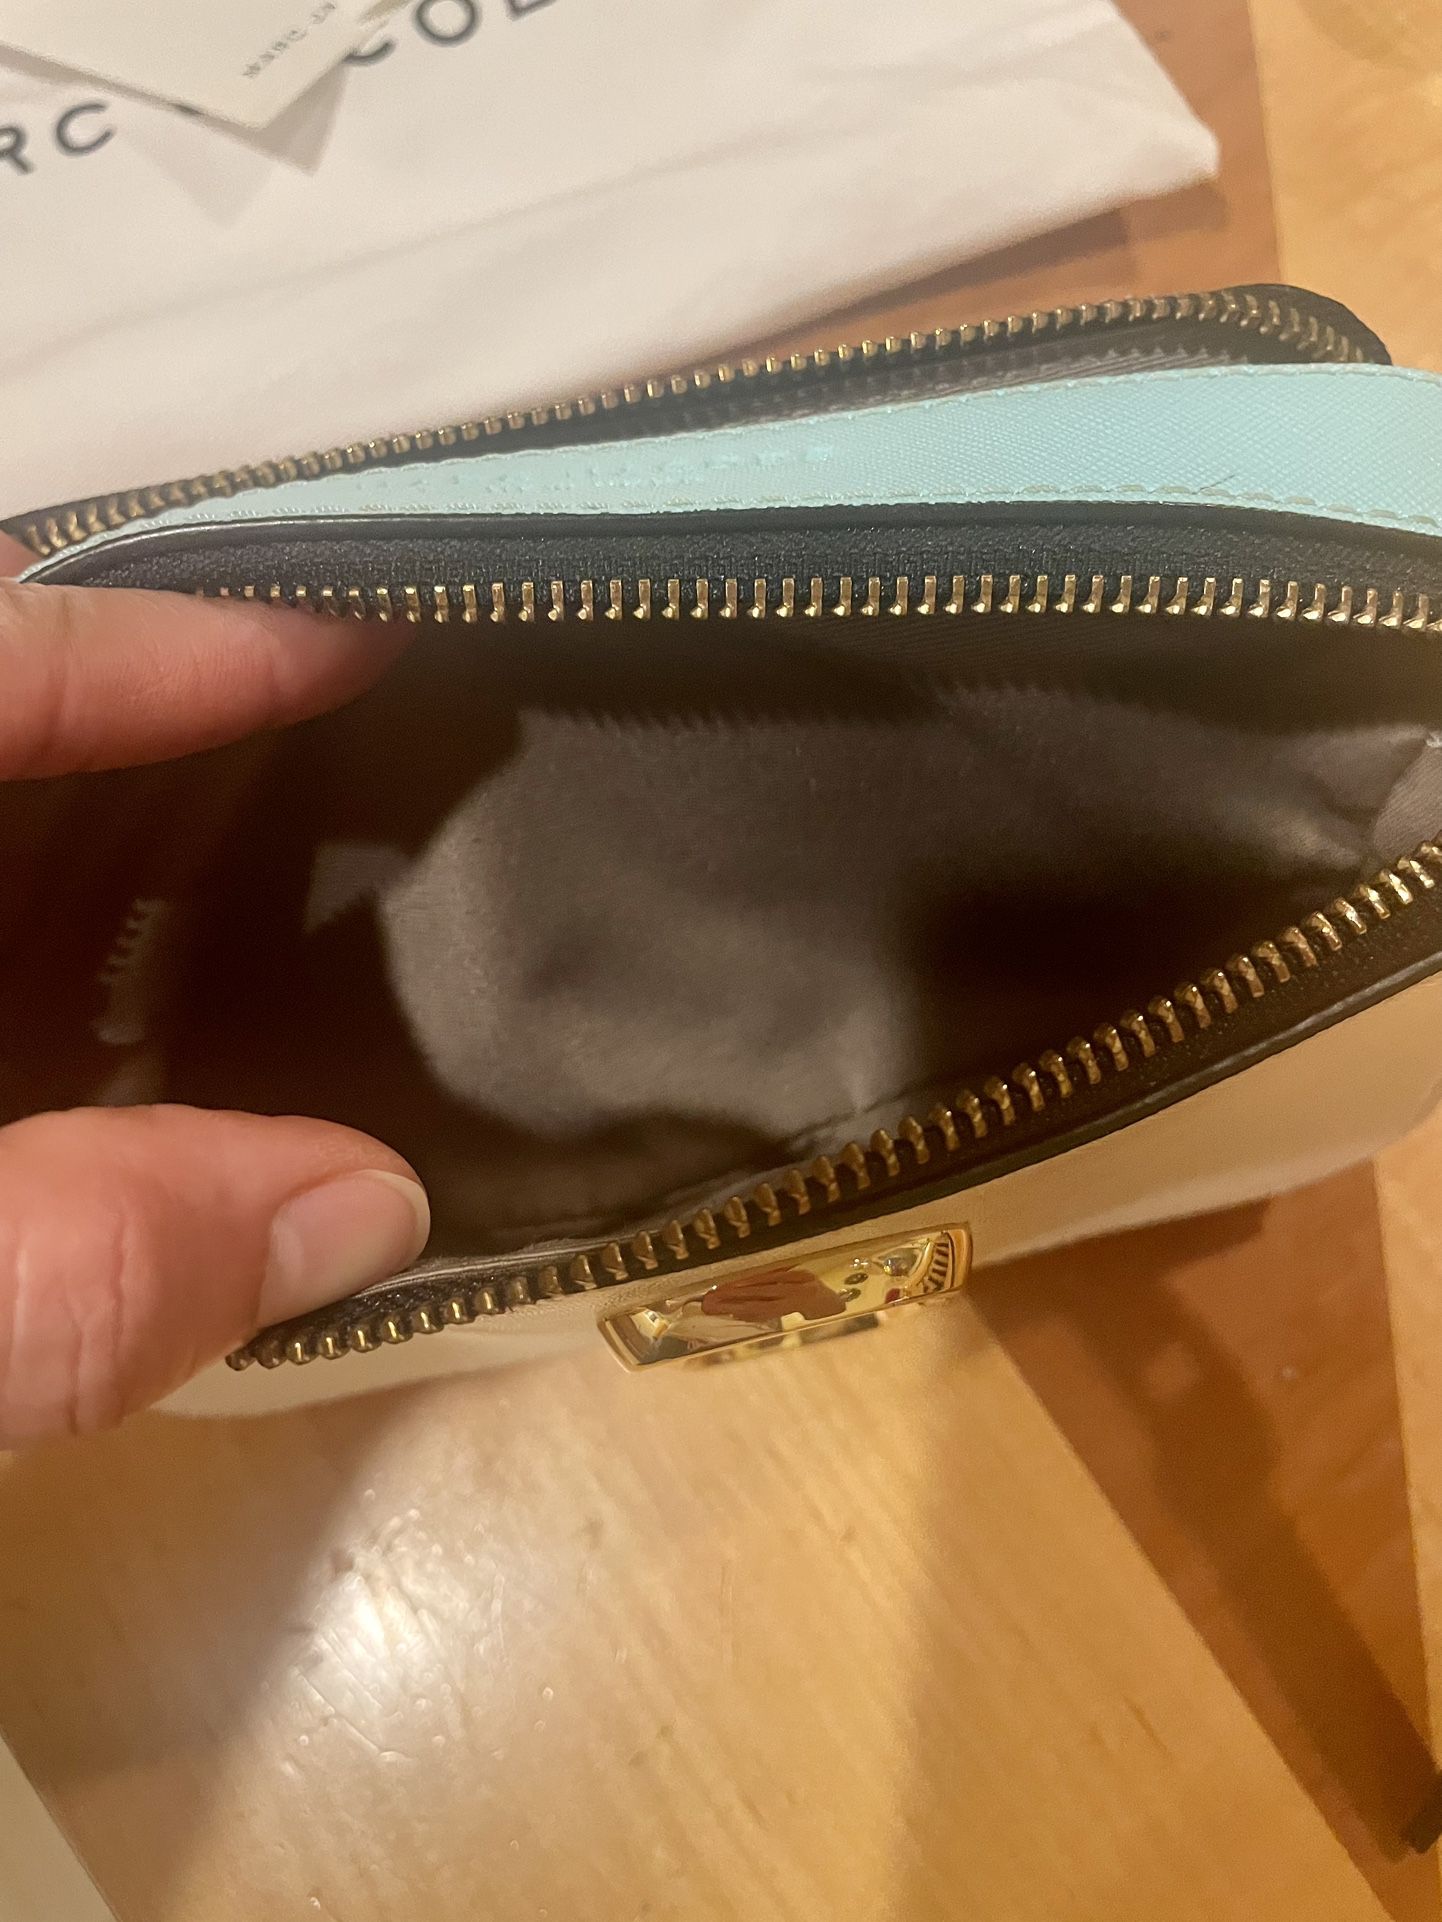 Marc Jacobs Snapshot Bag for Sale in Brooklyn, NY - OfferUp